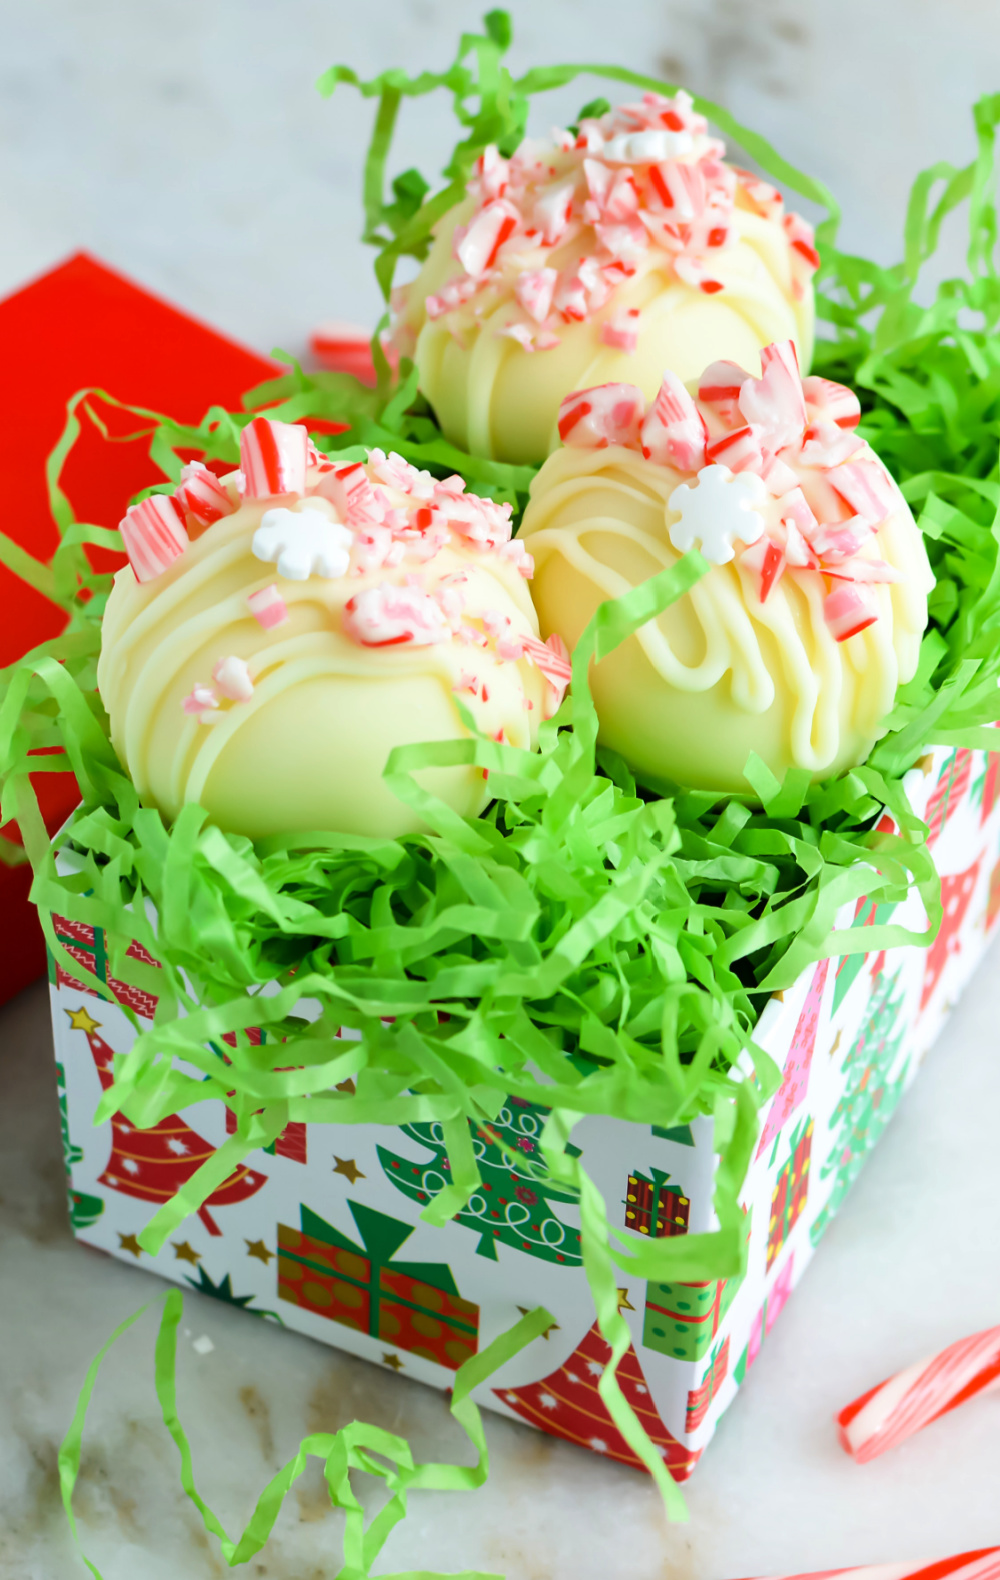 Peppermint White Chocolate Cocoa Bombs in a gift box.